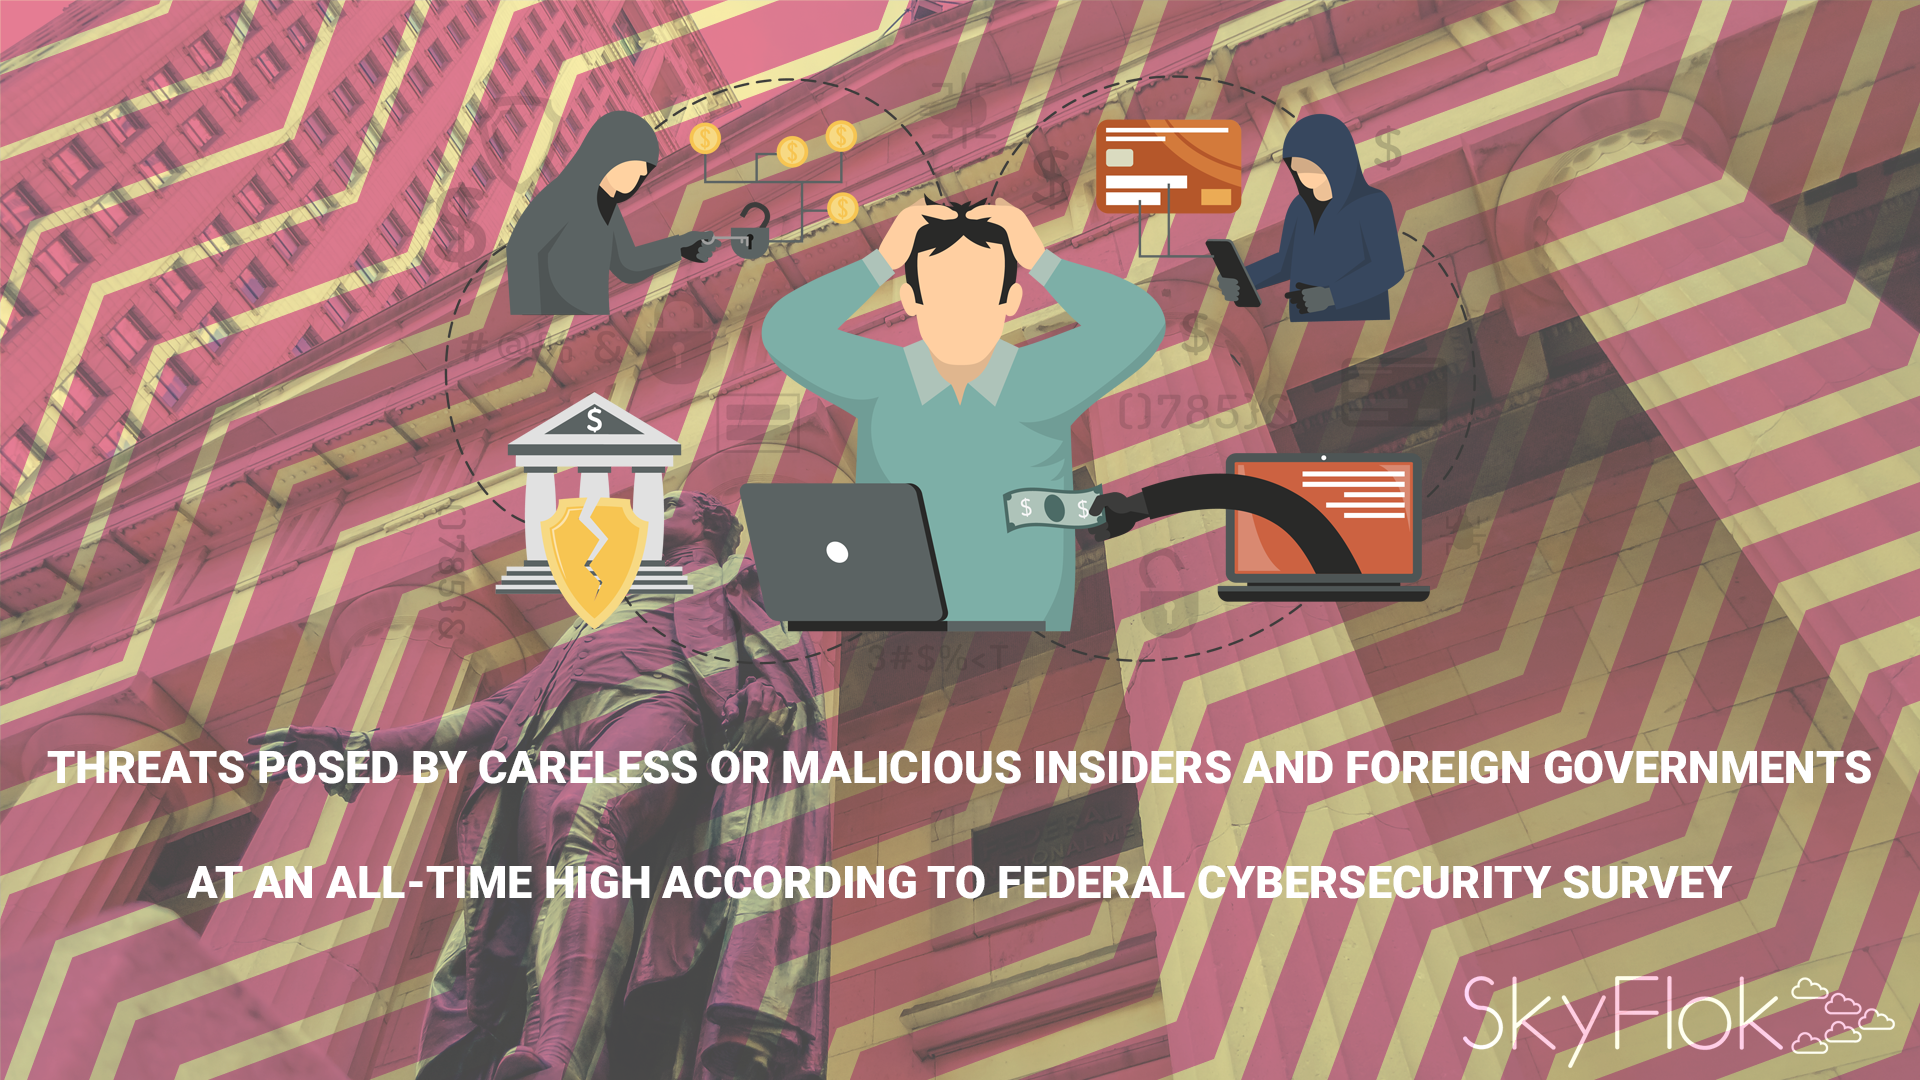 Read more about the article Threats Posed by Careless or Malicious Insiders and Foreign Governments at an All-Time High according to Federal Cybersecurity Survey